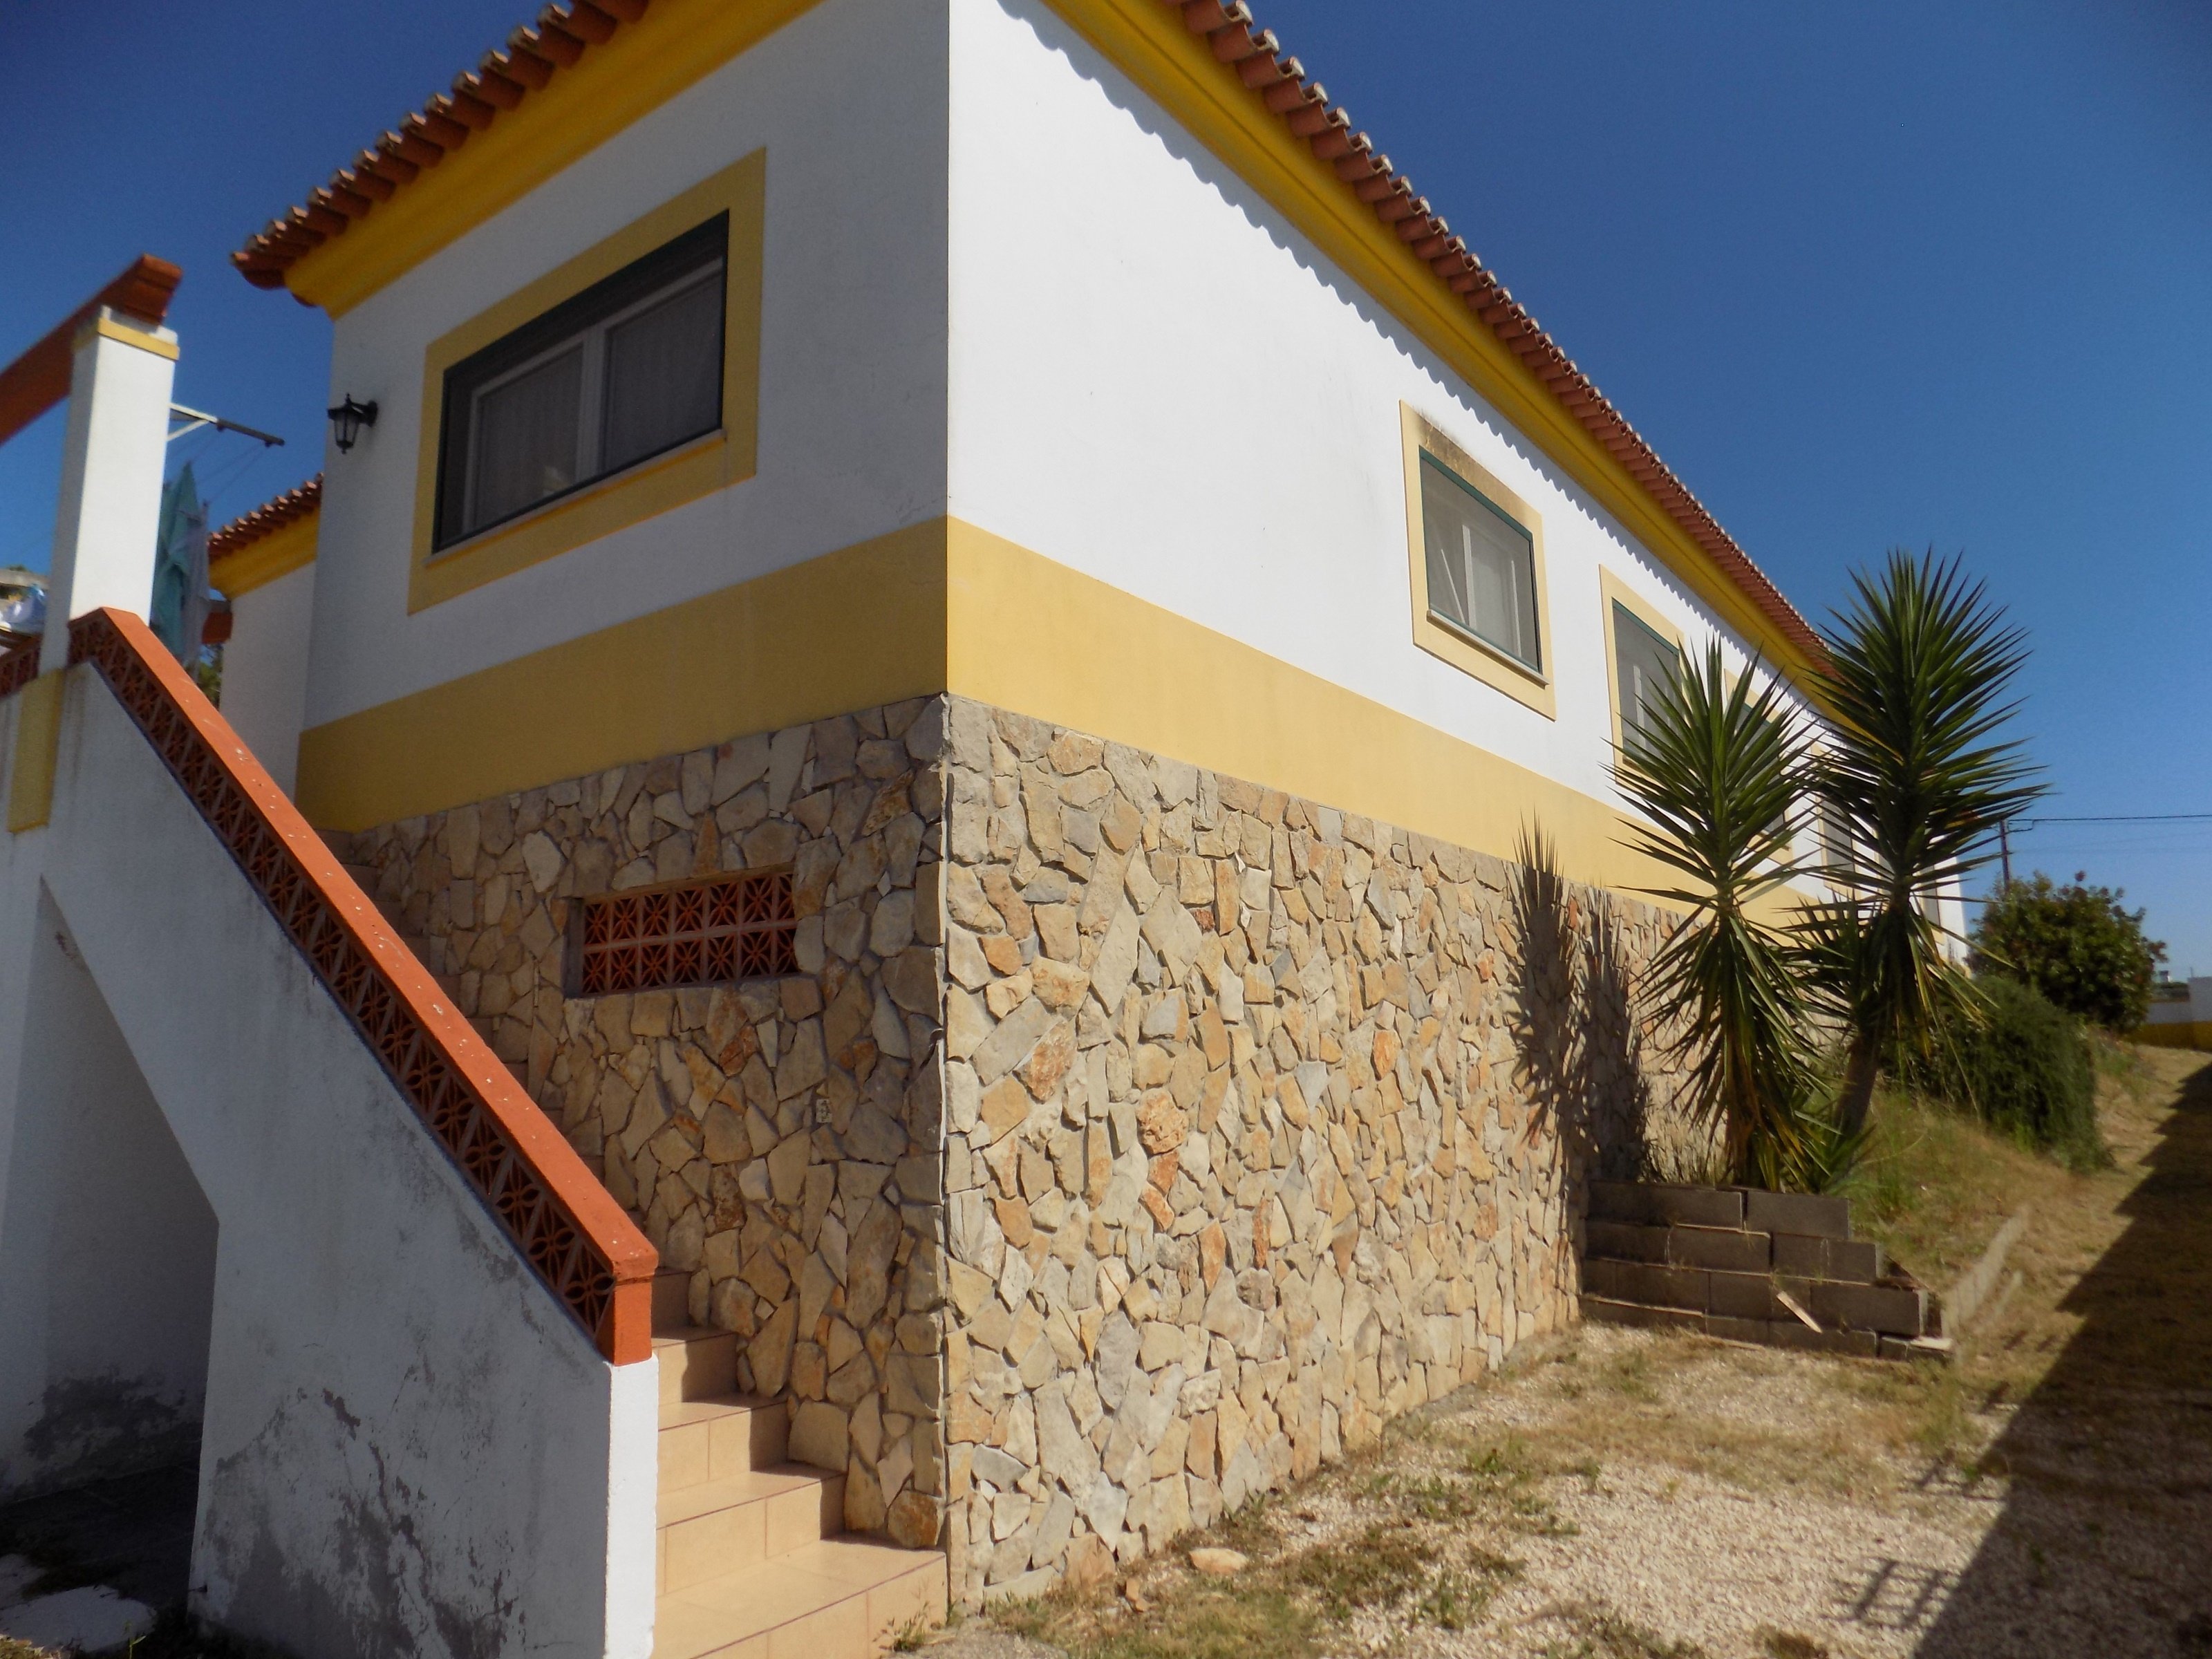 House for sale in Bombarral, Silver Coast, Portugal 677504440